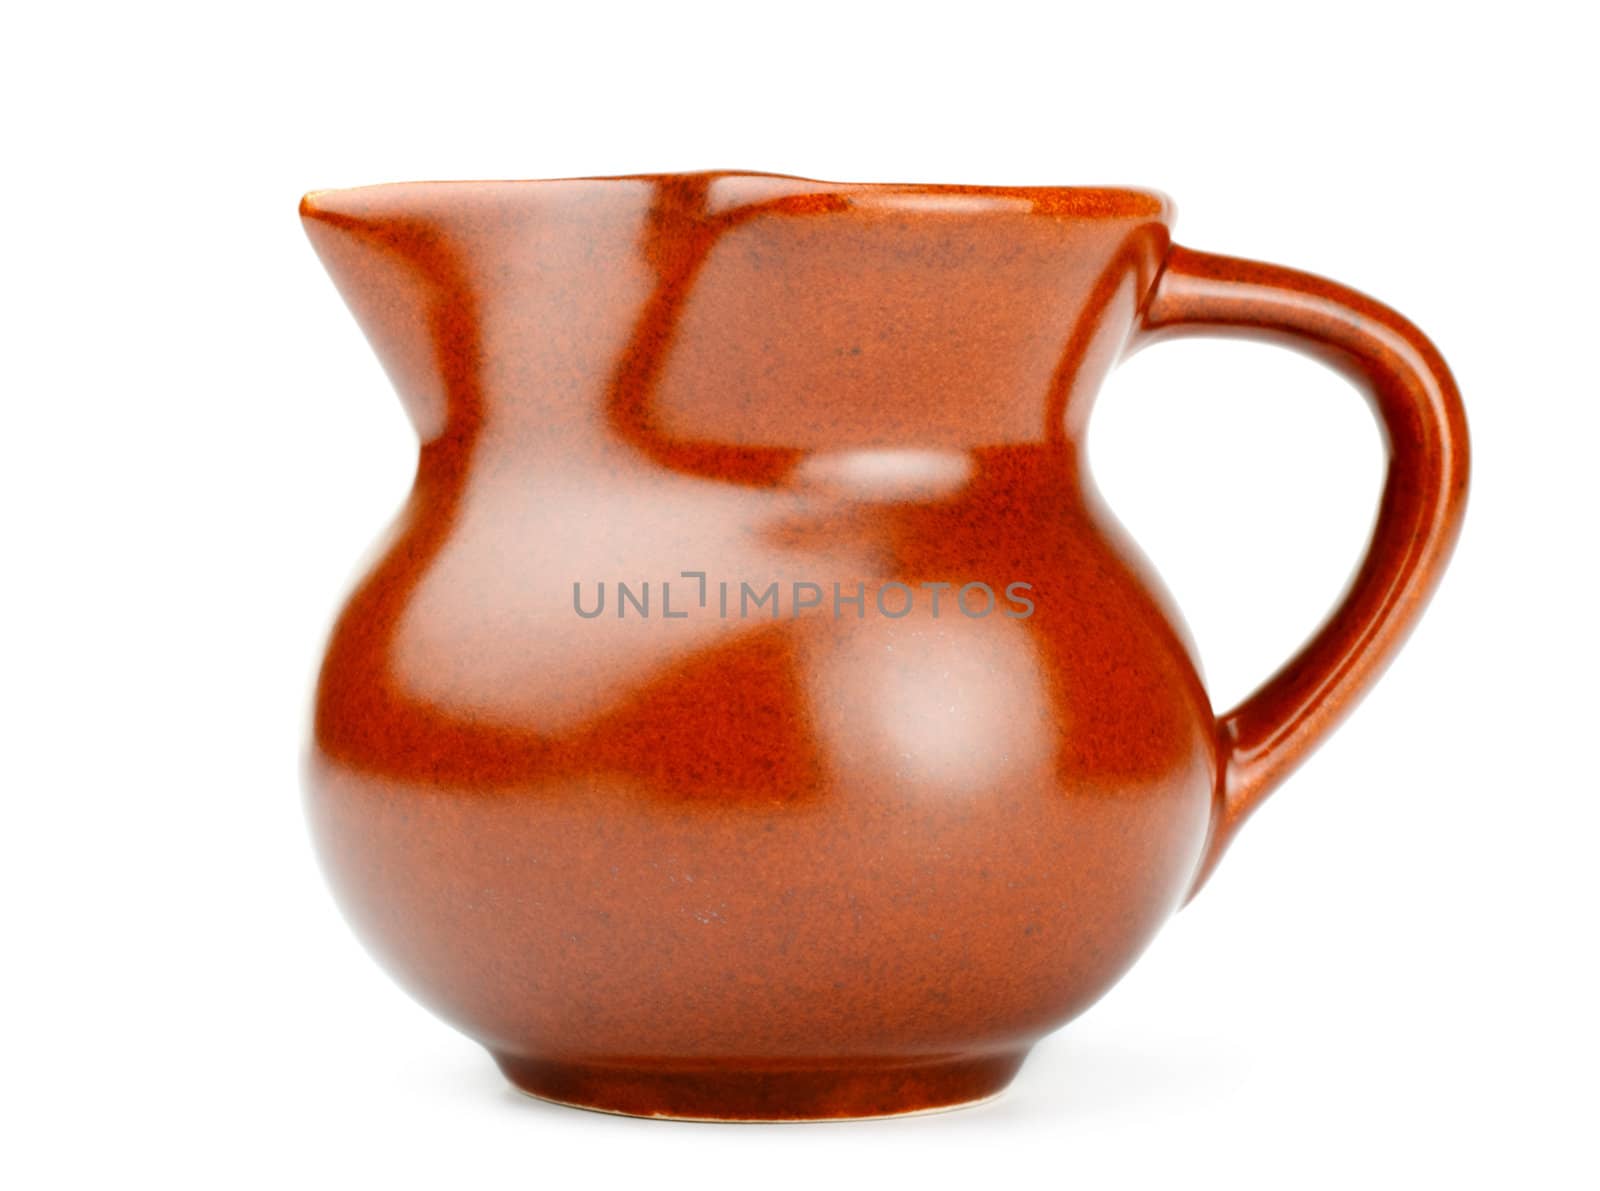 clay milk jug isolated on white background